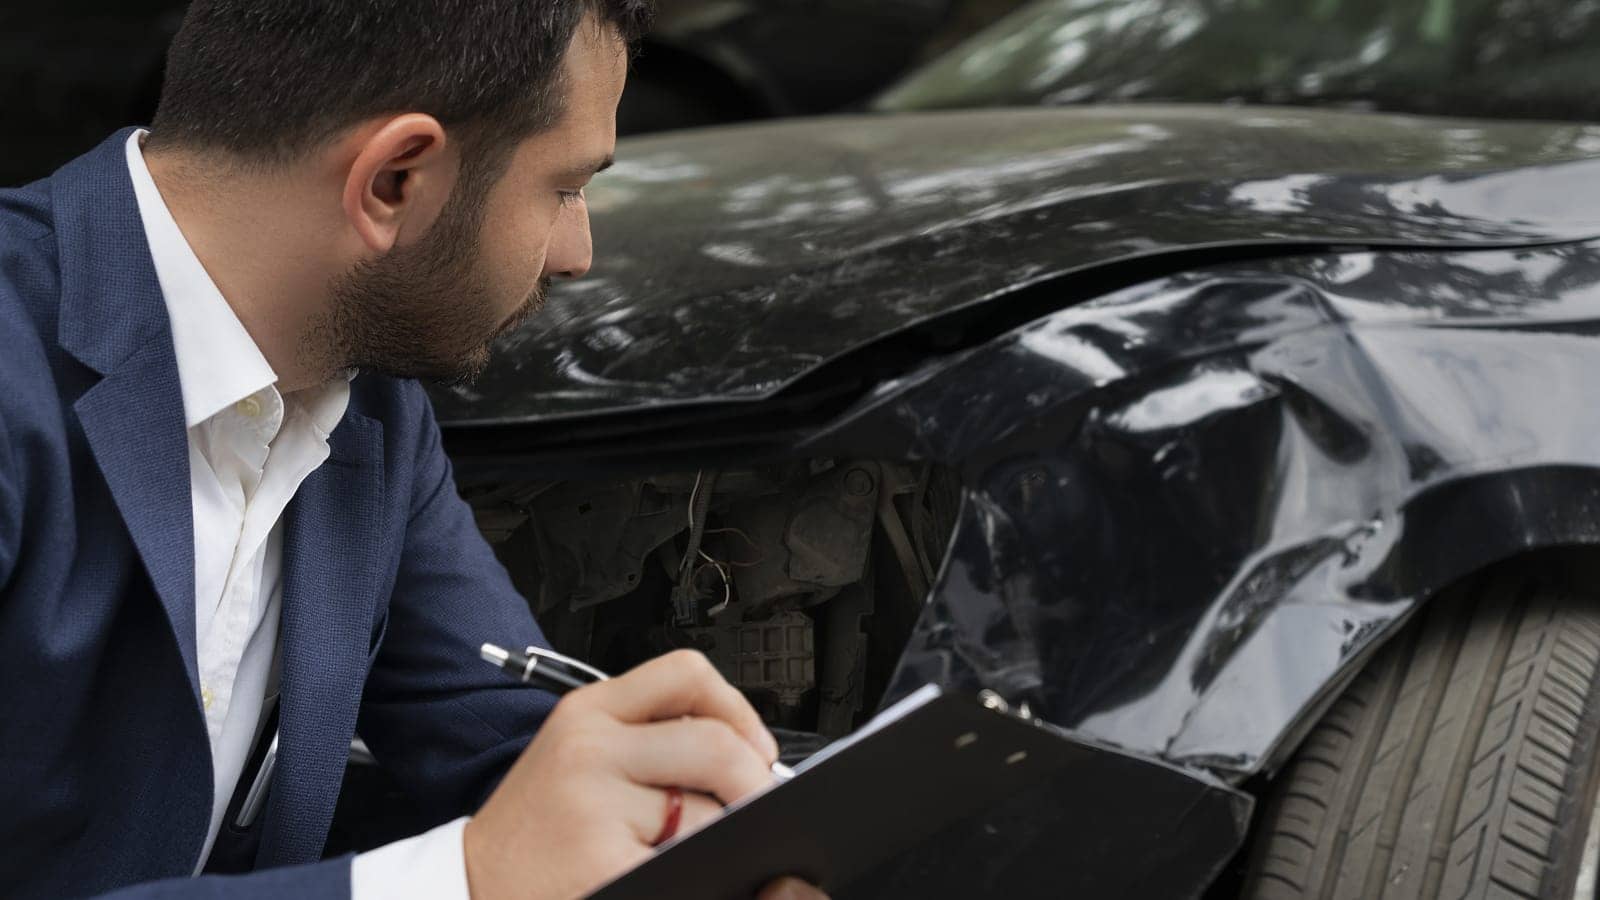 Insurance agent evaluating a car accident